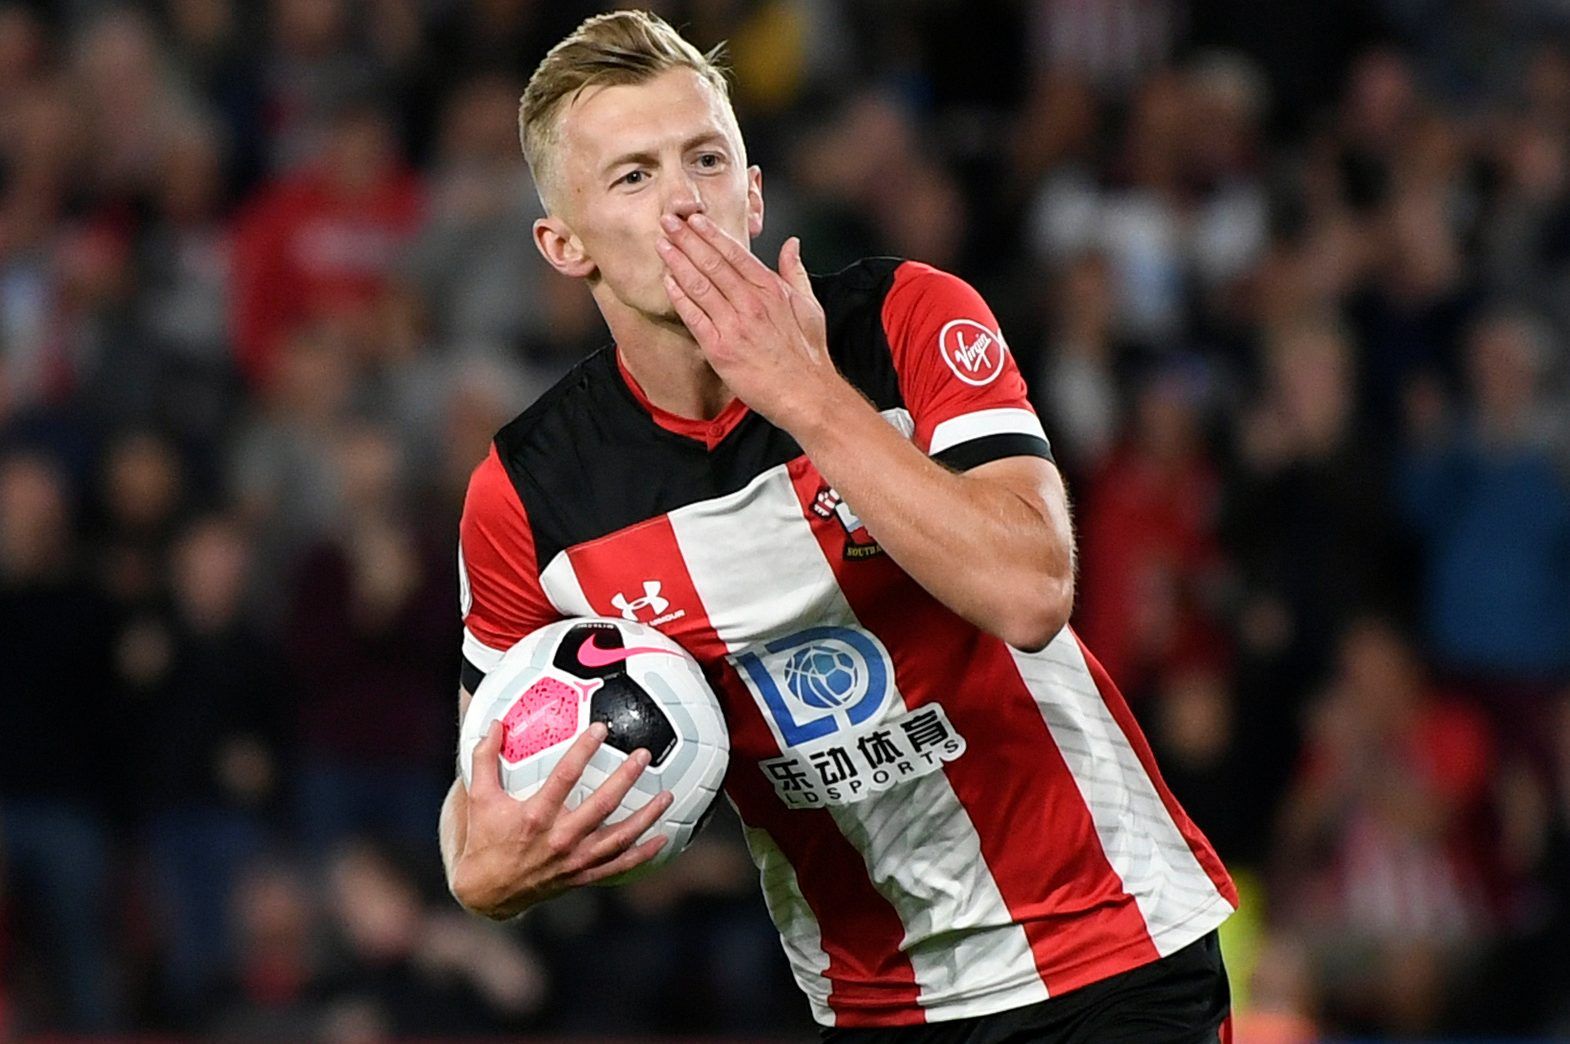 Soccer Football - Premier League - Southampton v AFC Bournemouth - St Mary's Stadium, Southampton, Britain - September 20, 2019   Southampton's James Ward-Prowse celebrates scoring their first goal from the penalty spot        Action Images via Reuters/Tony O'Brien    EDITORIAL USE ONLY. No use with unauthorized audio, video, data, fixture lists, club/league logos or 